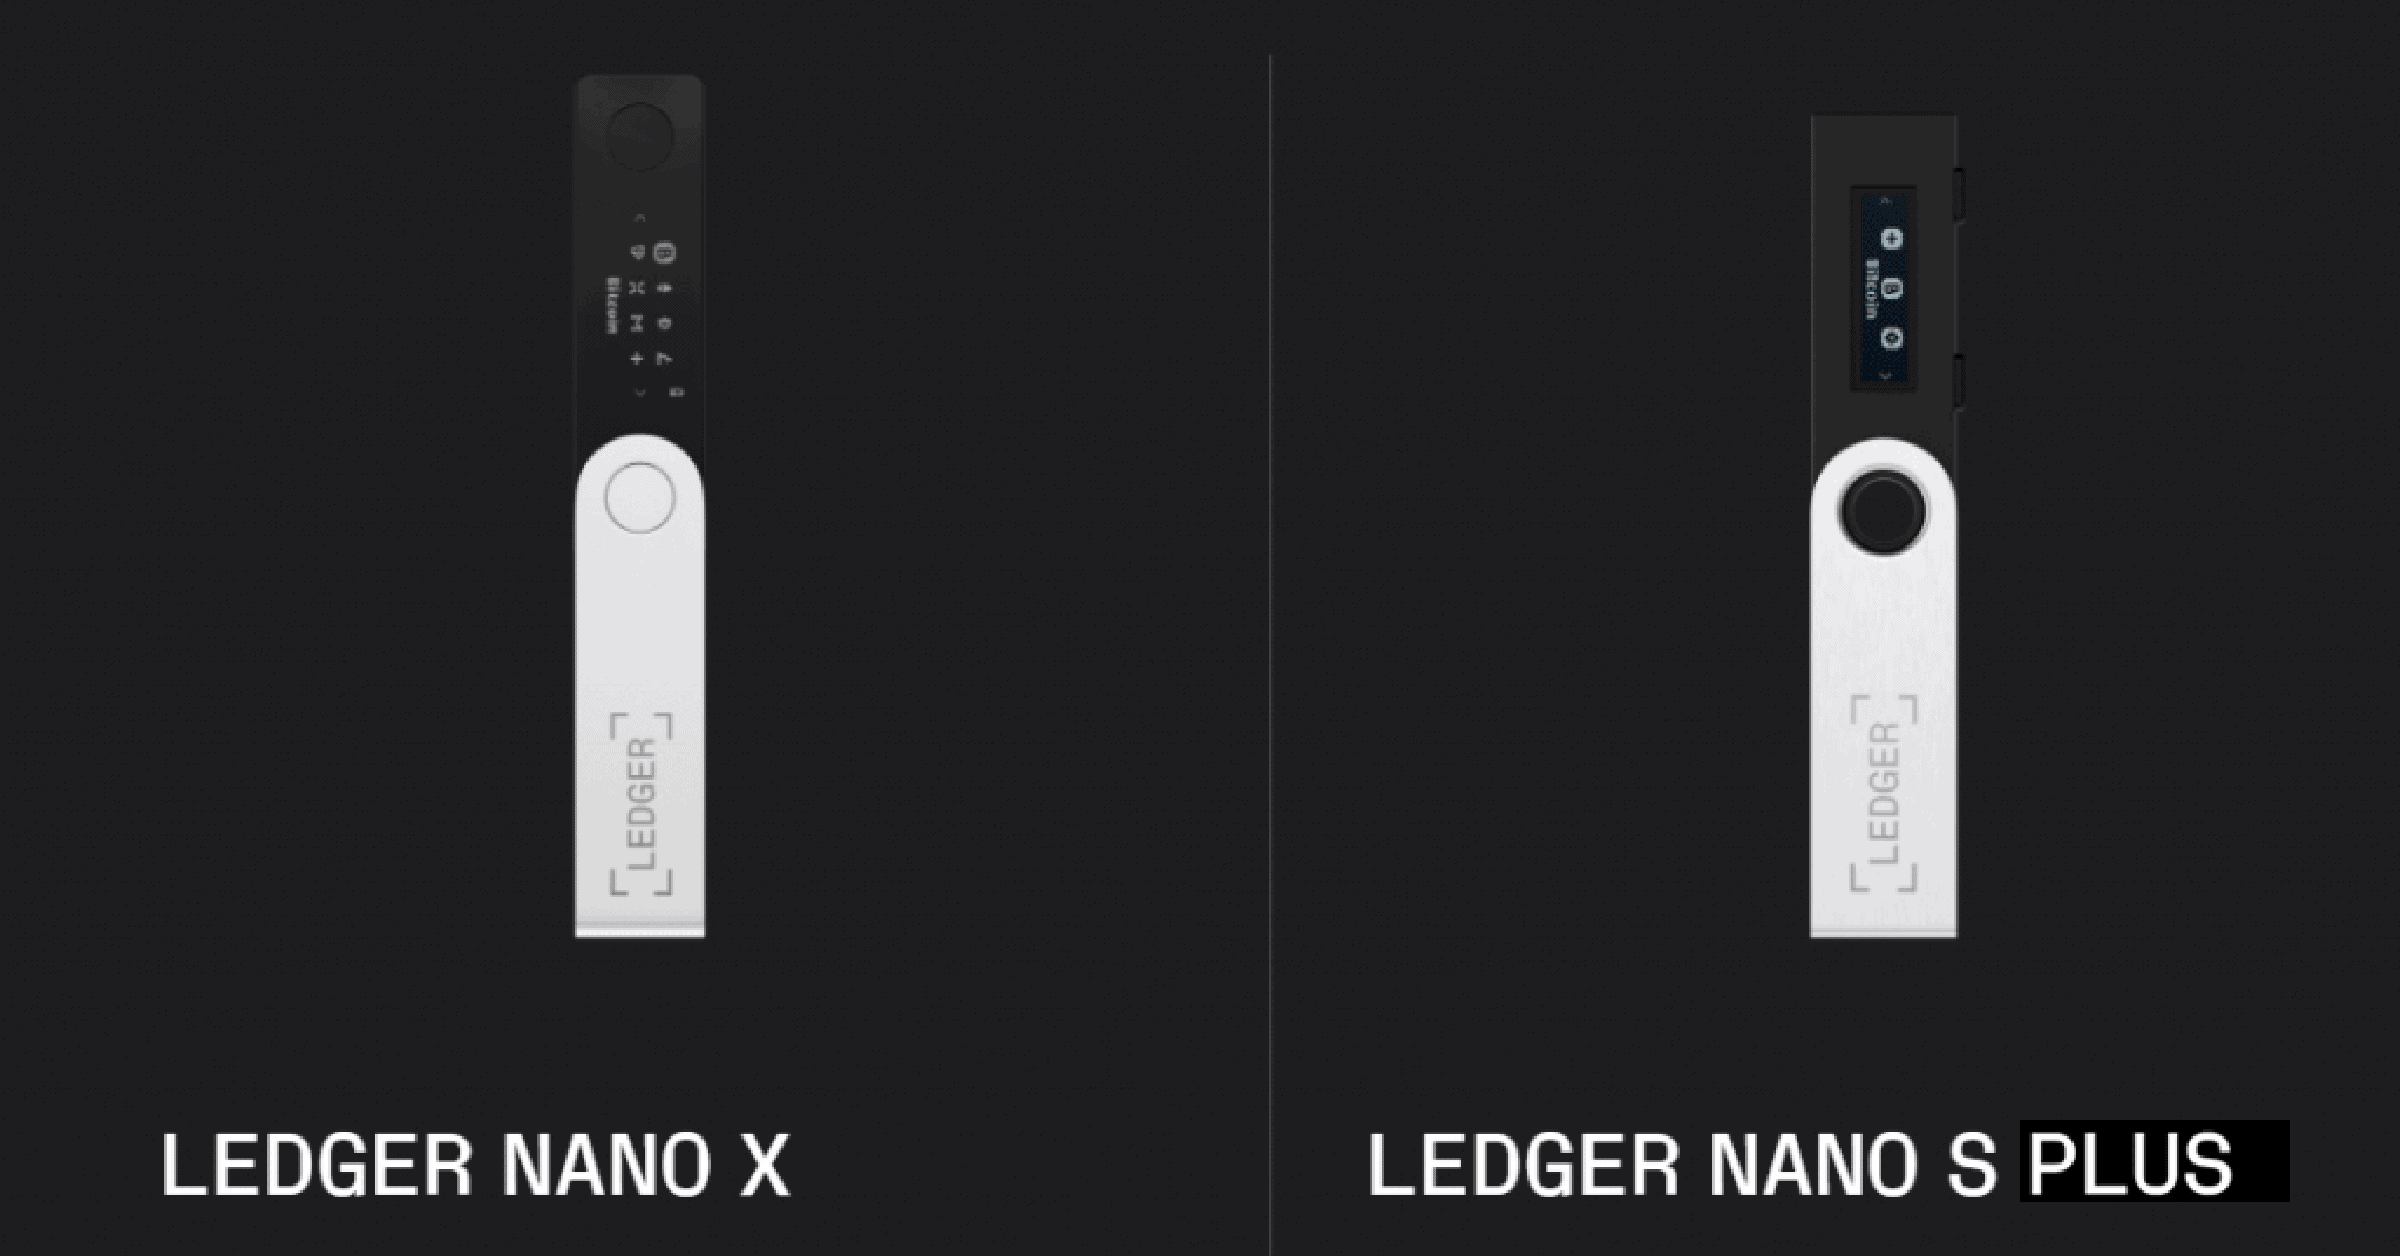 Ledger Nano S Plus cryptocurrency wallet features a bigger screen